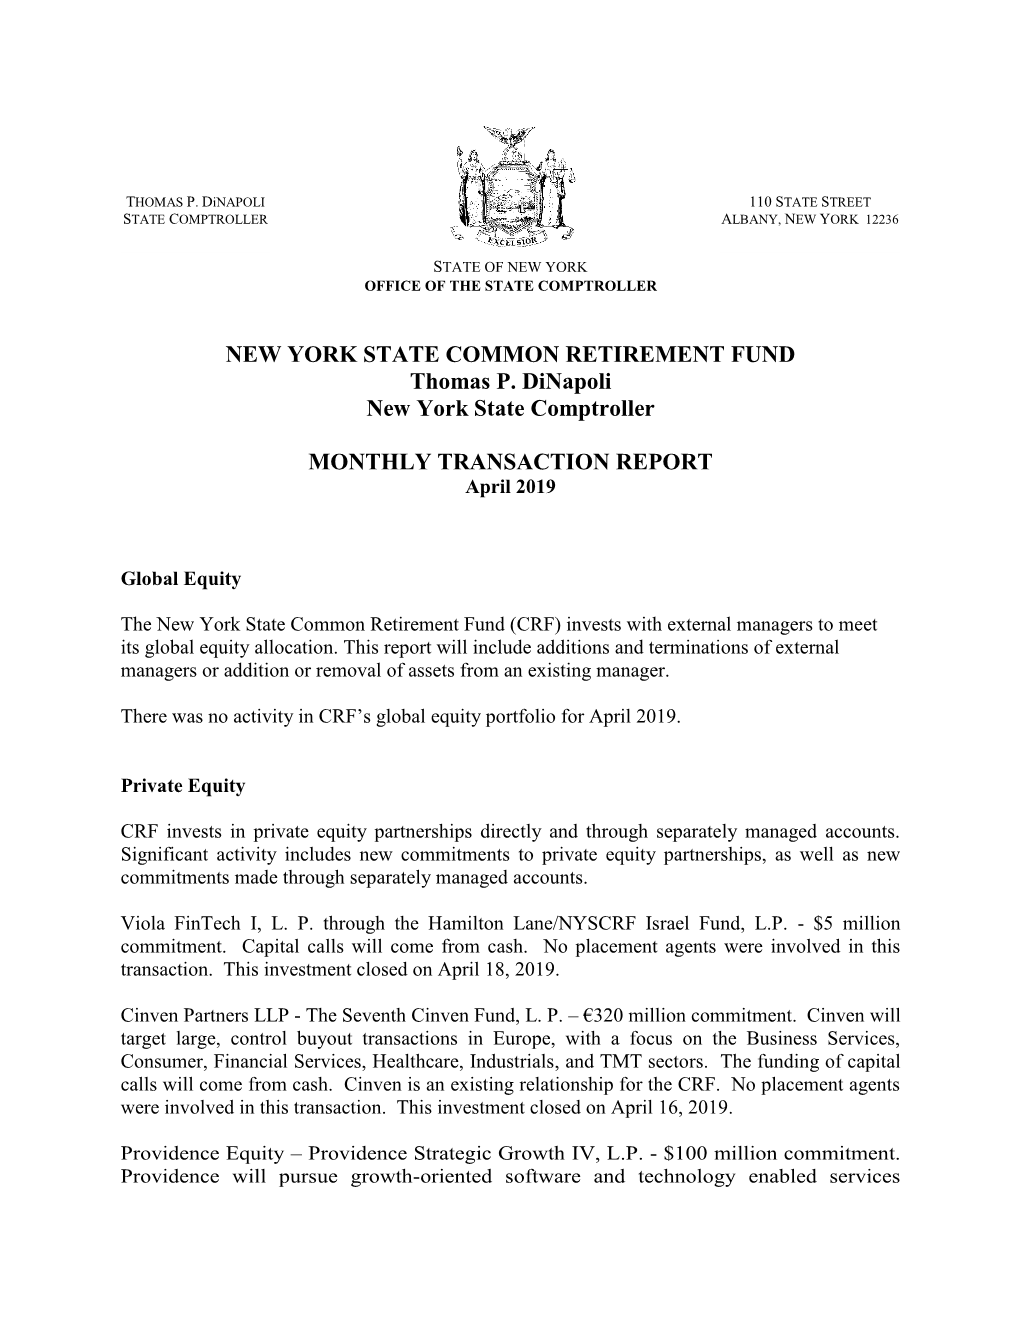 NYSCRF Monthly Transaction Report April 2019